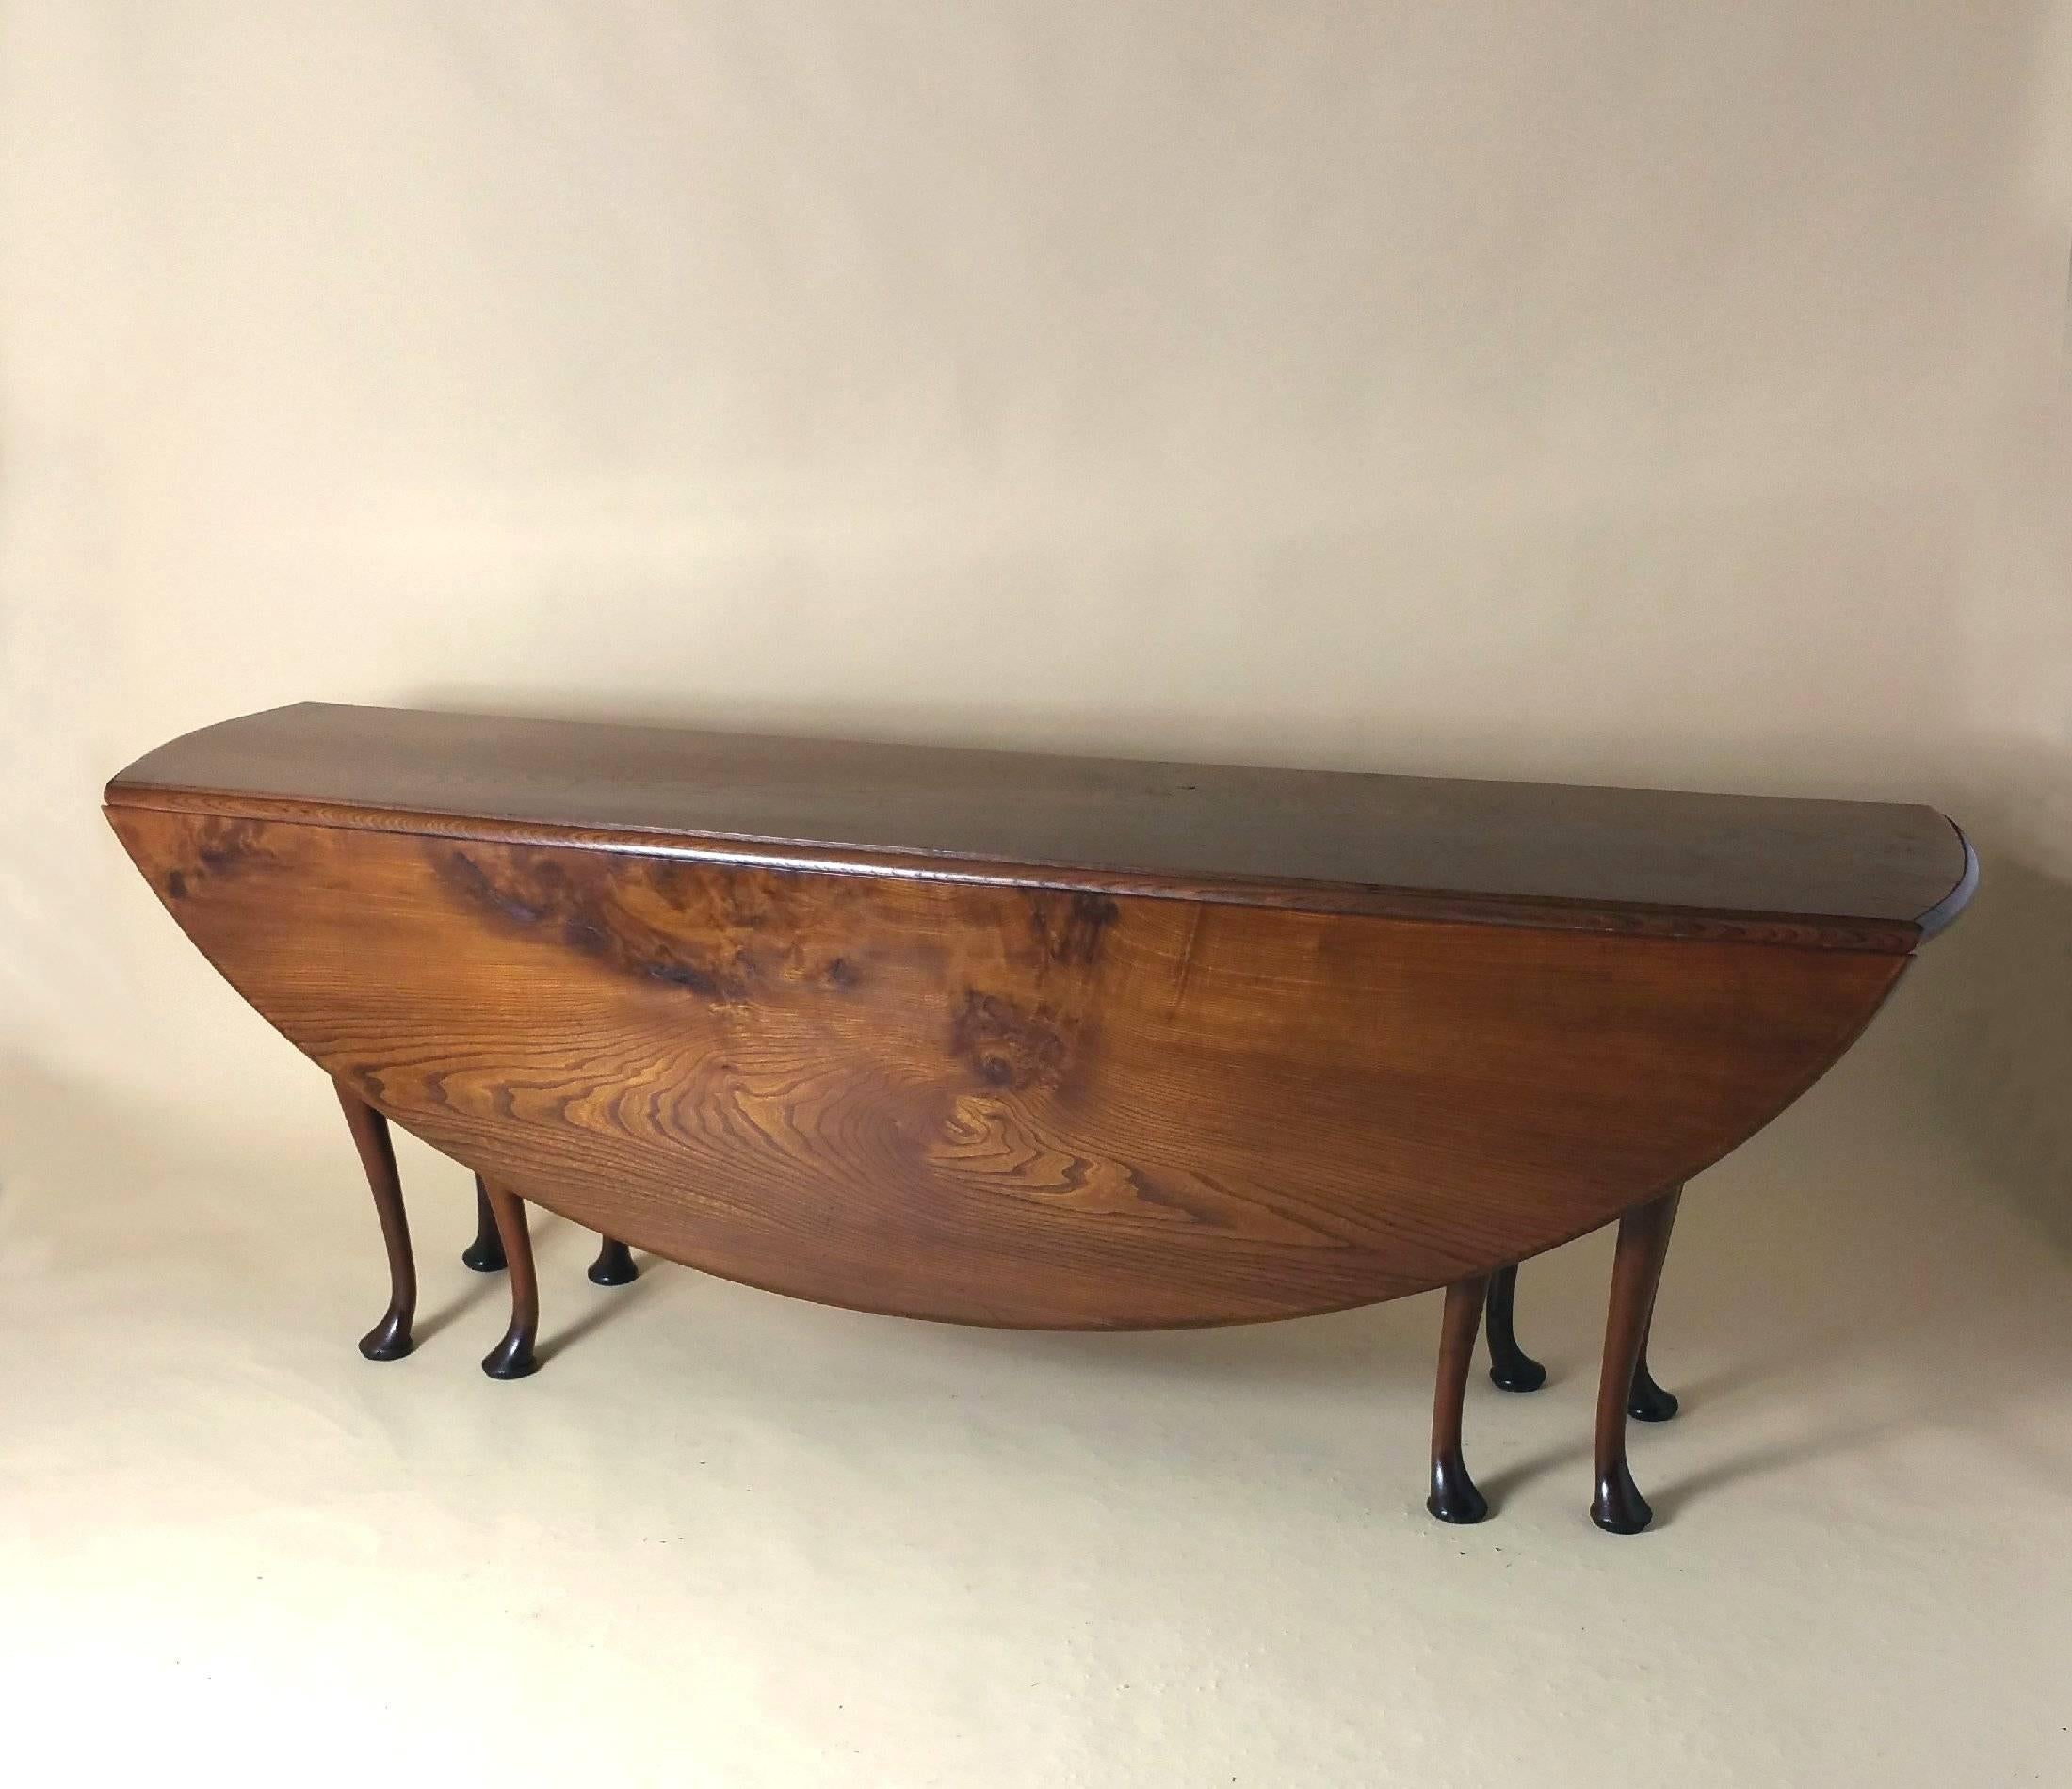 This splendid and solid mid-20th century drop-leaf wake table is made from pollard Elm, and is supported by eight yew wood cabriole legs. The table opens up to a more unusual long oval shape, which would accommodate eight-ten people. It measures 84